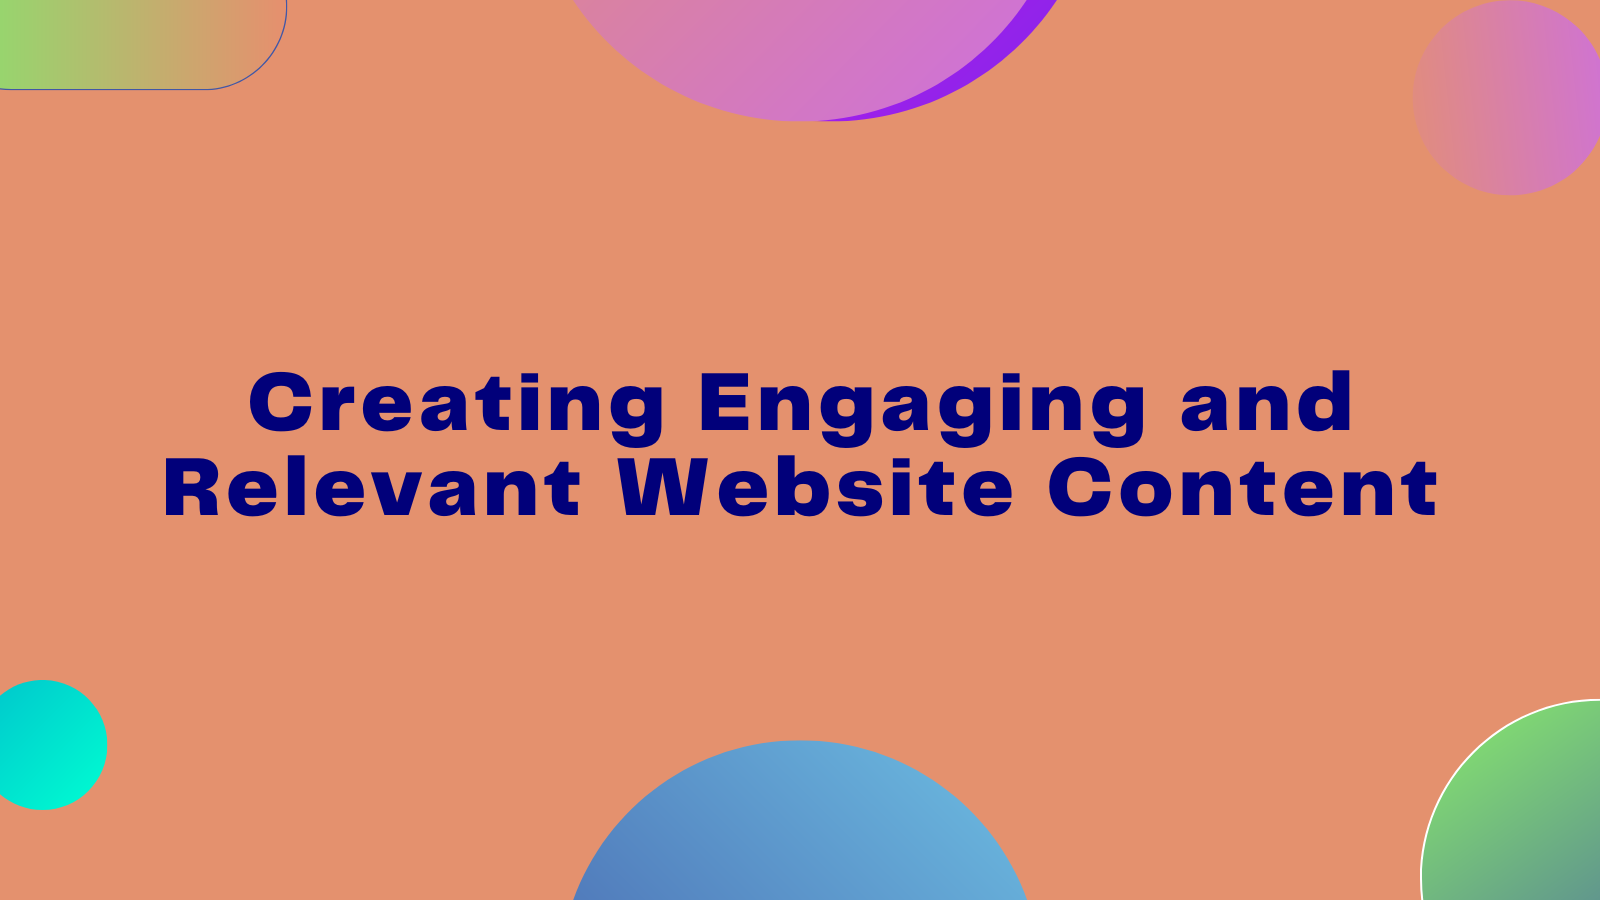 Creating Engaging and Relevant Website Content